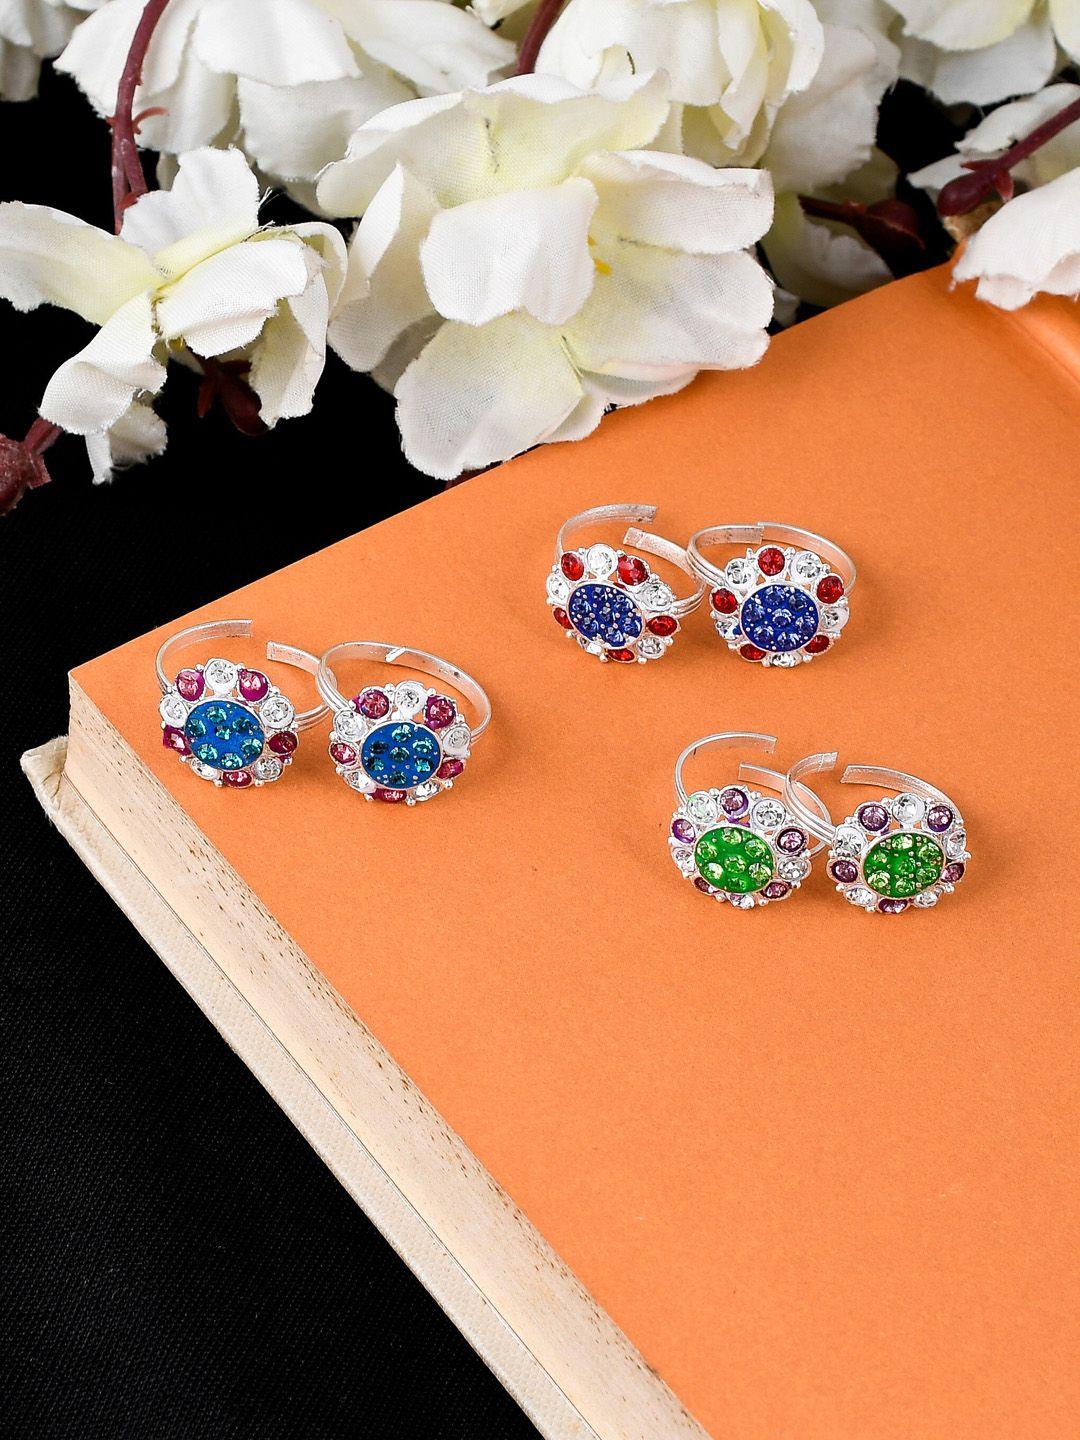 silvermerc designs set of 3 silver-plated blue & green stone-studded toe rings